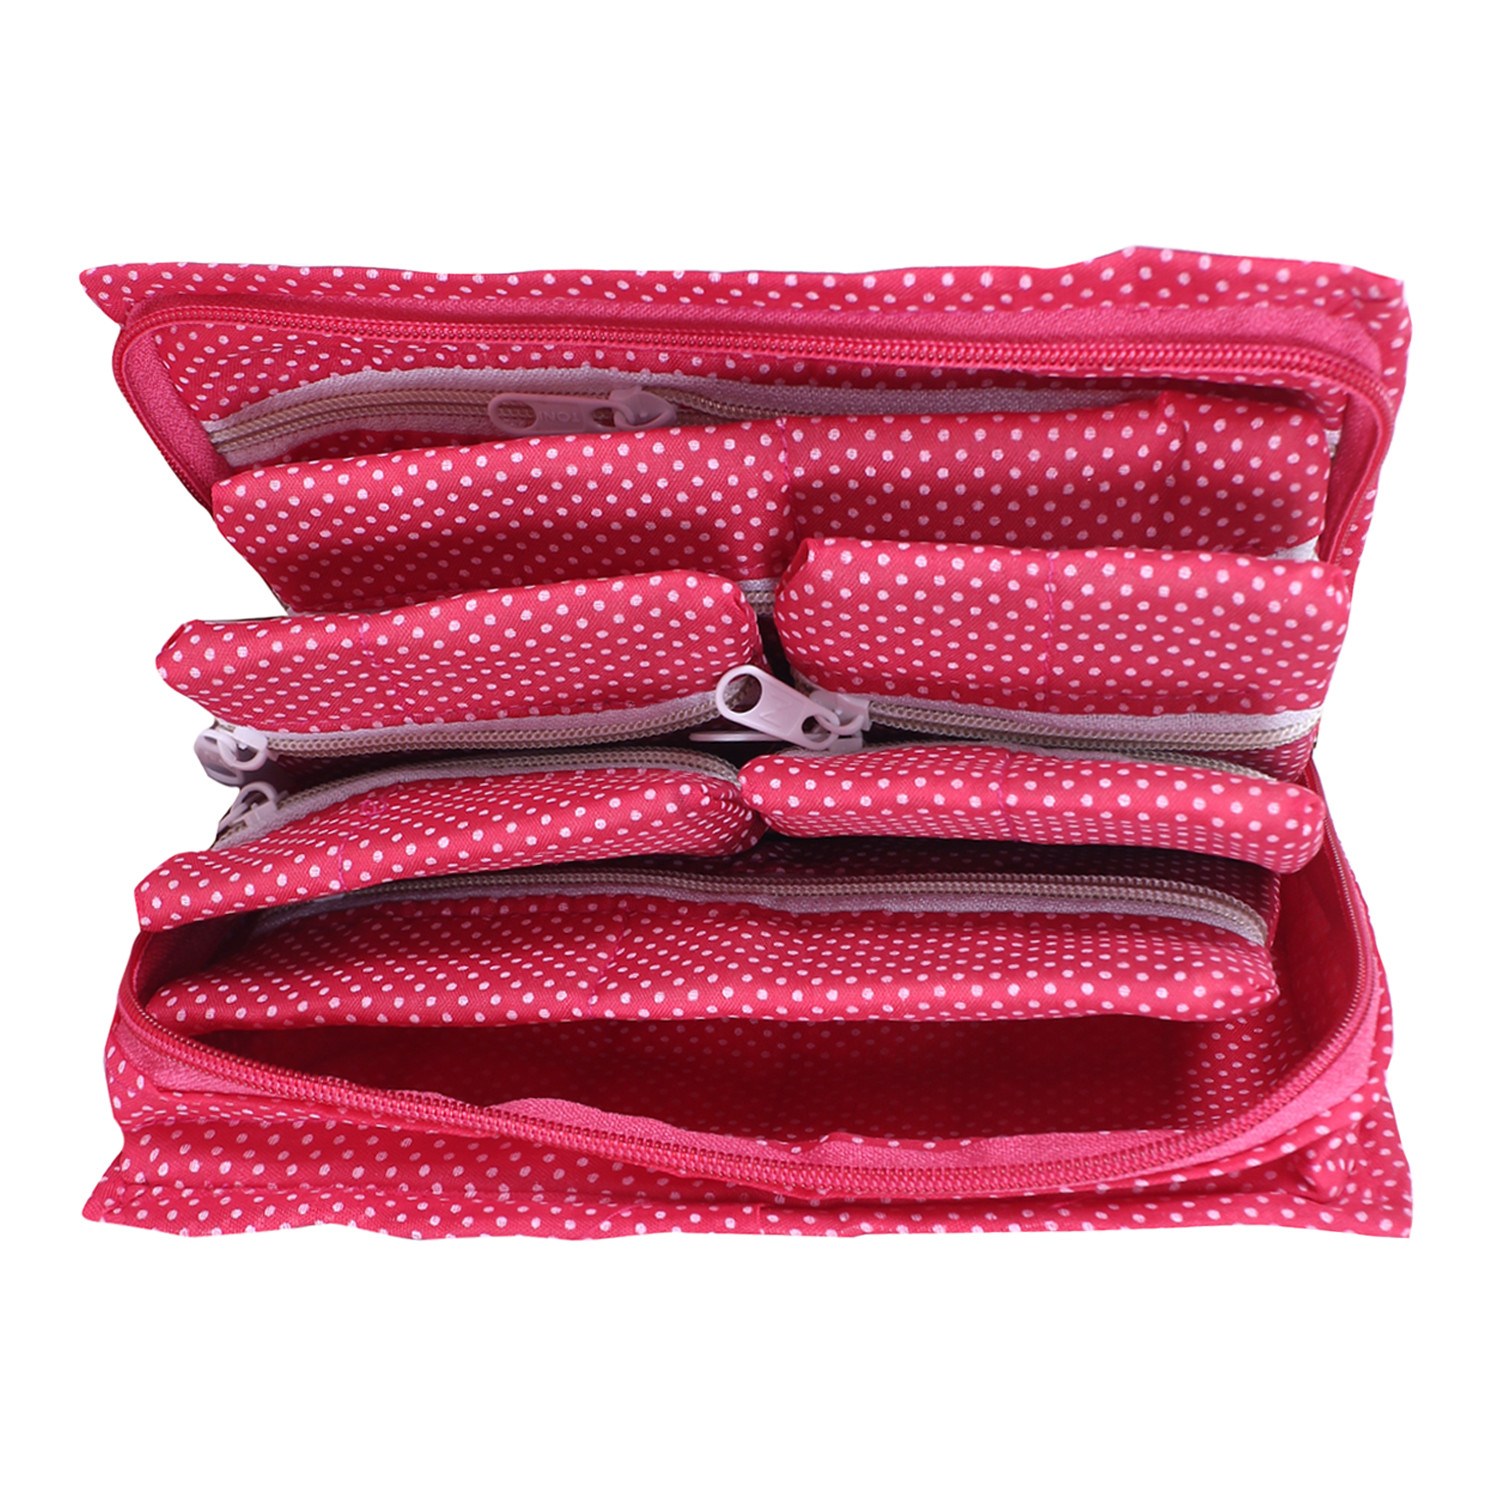 Kuber Industries Jewellery Kit | Cotton Bow Dot Print Travel Kit | 7 Pouch Jewellery Storage Kit | Makeup Organizer for Woman | Pink